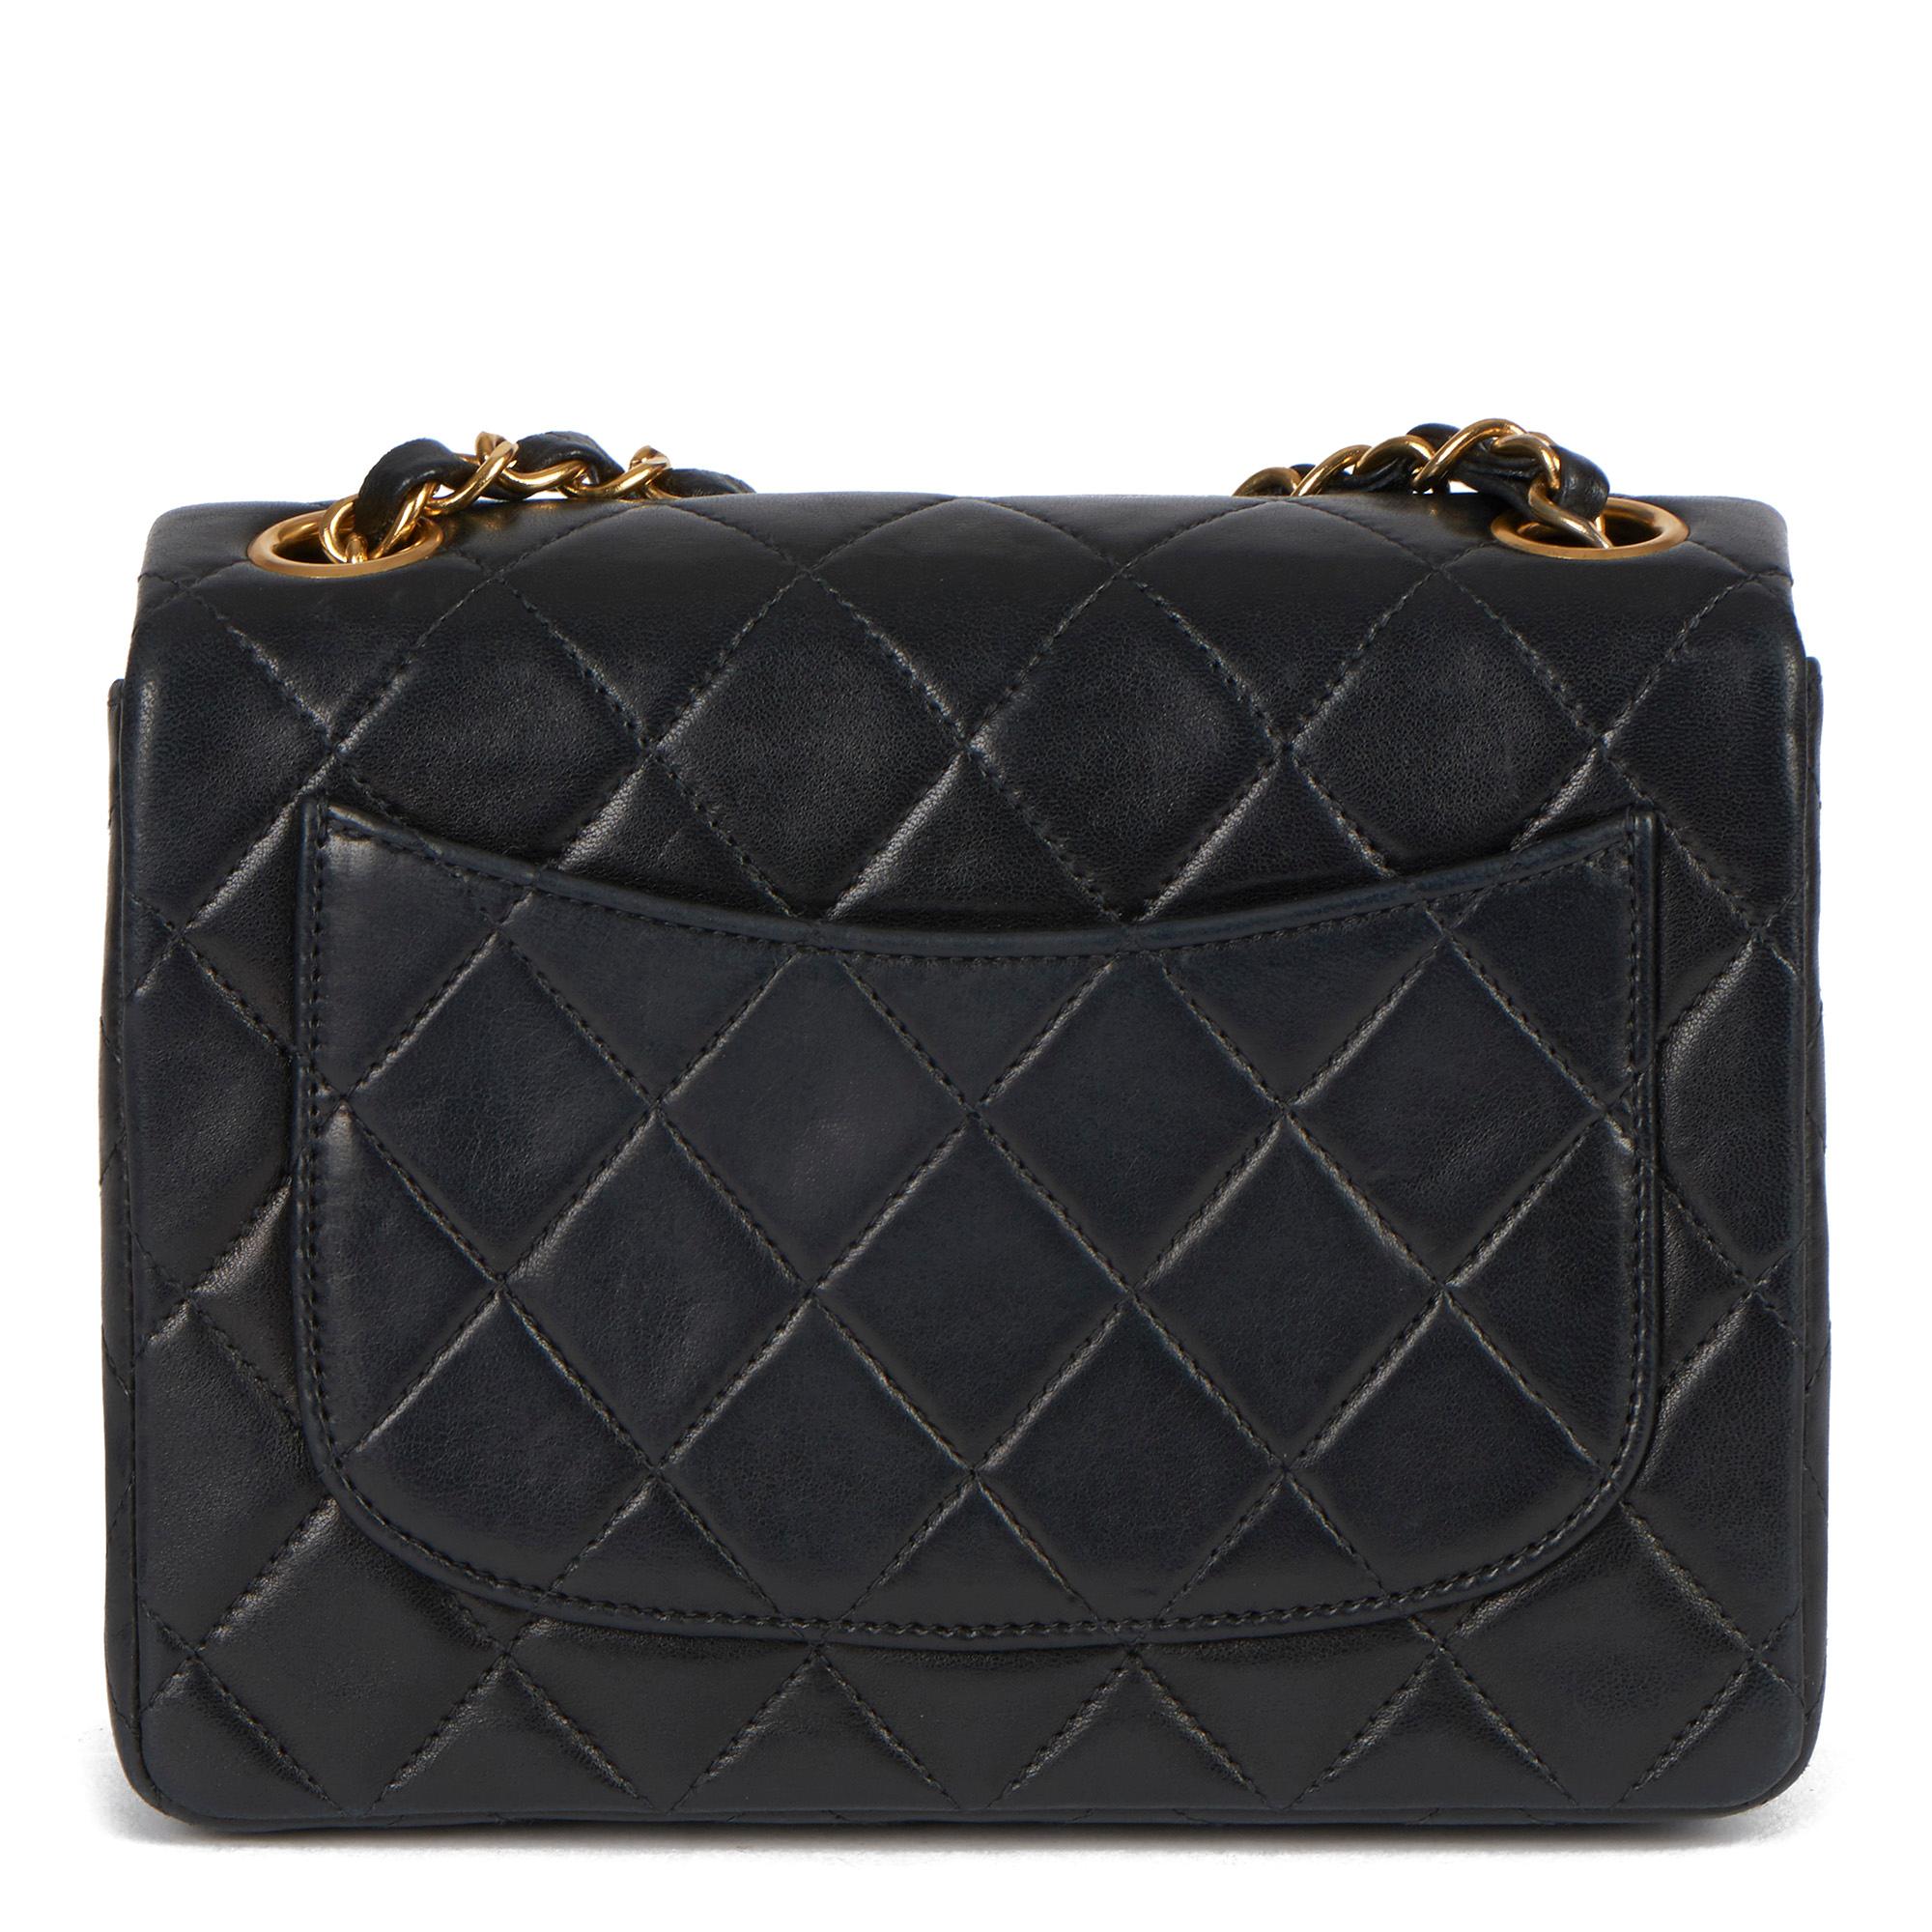 Chanel 1997 Black Quilted Lambskin Leather Vintage Mini Flap Bag  7